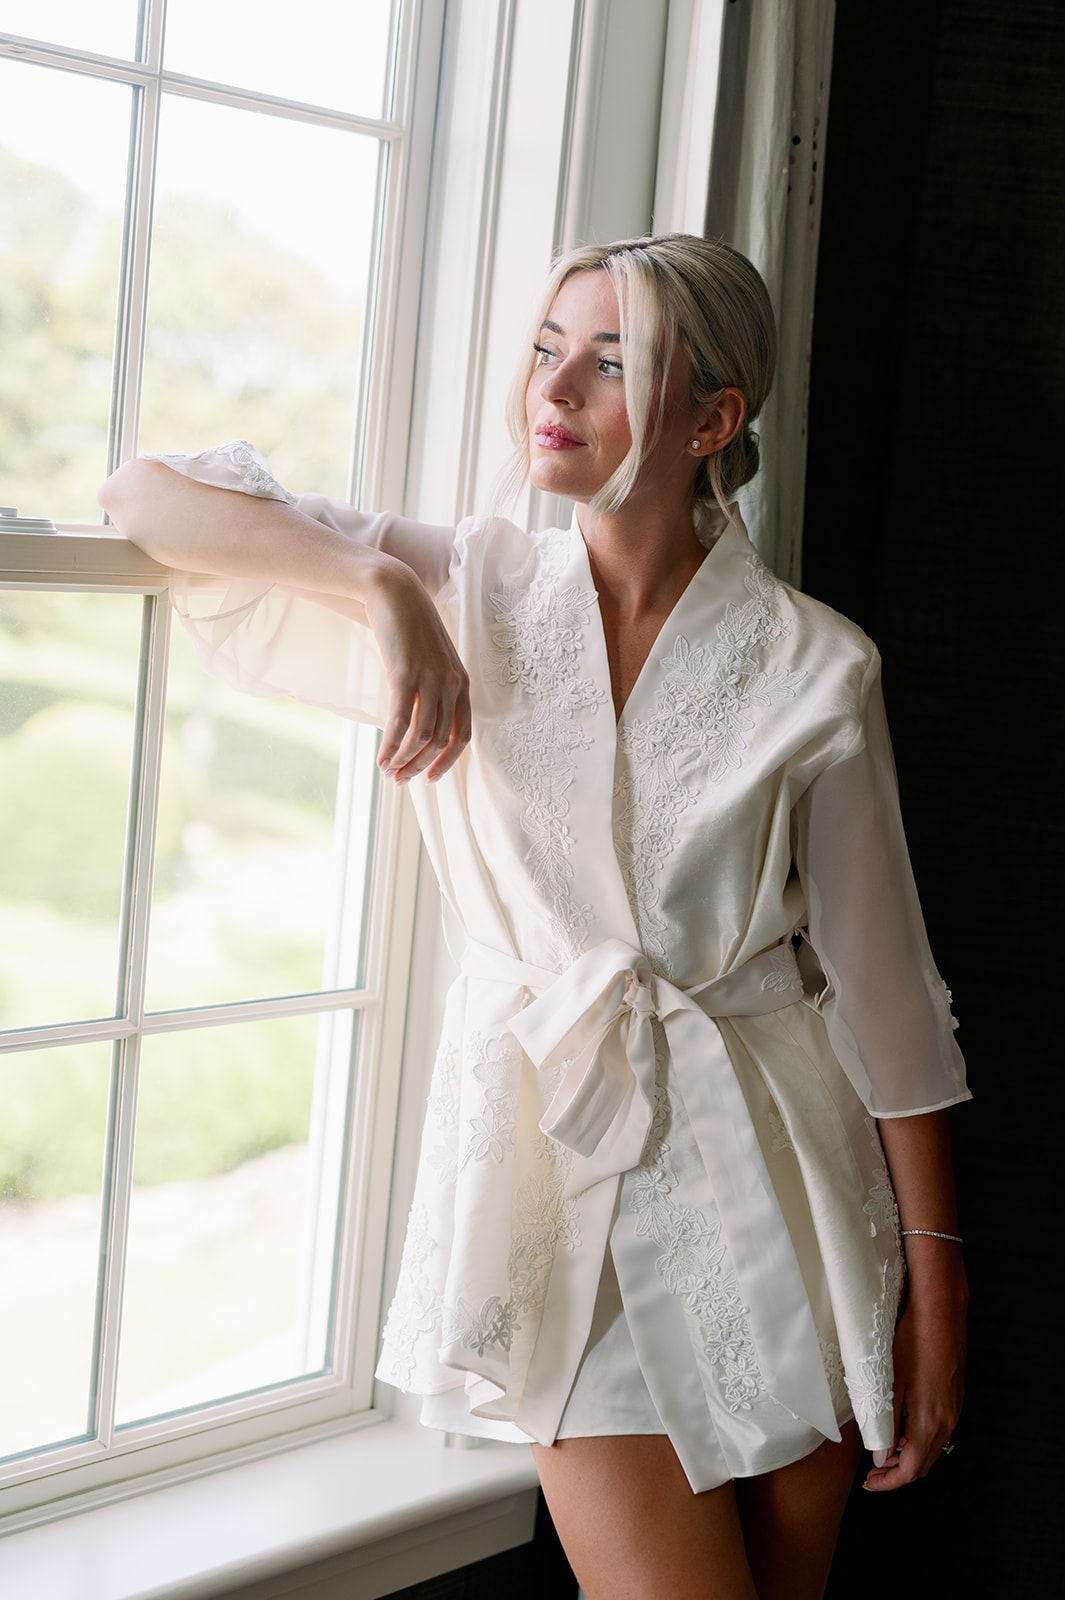 Bride in a custom white robe made from her mom's vintage wedding dress gazing out of a window. 